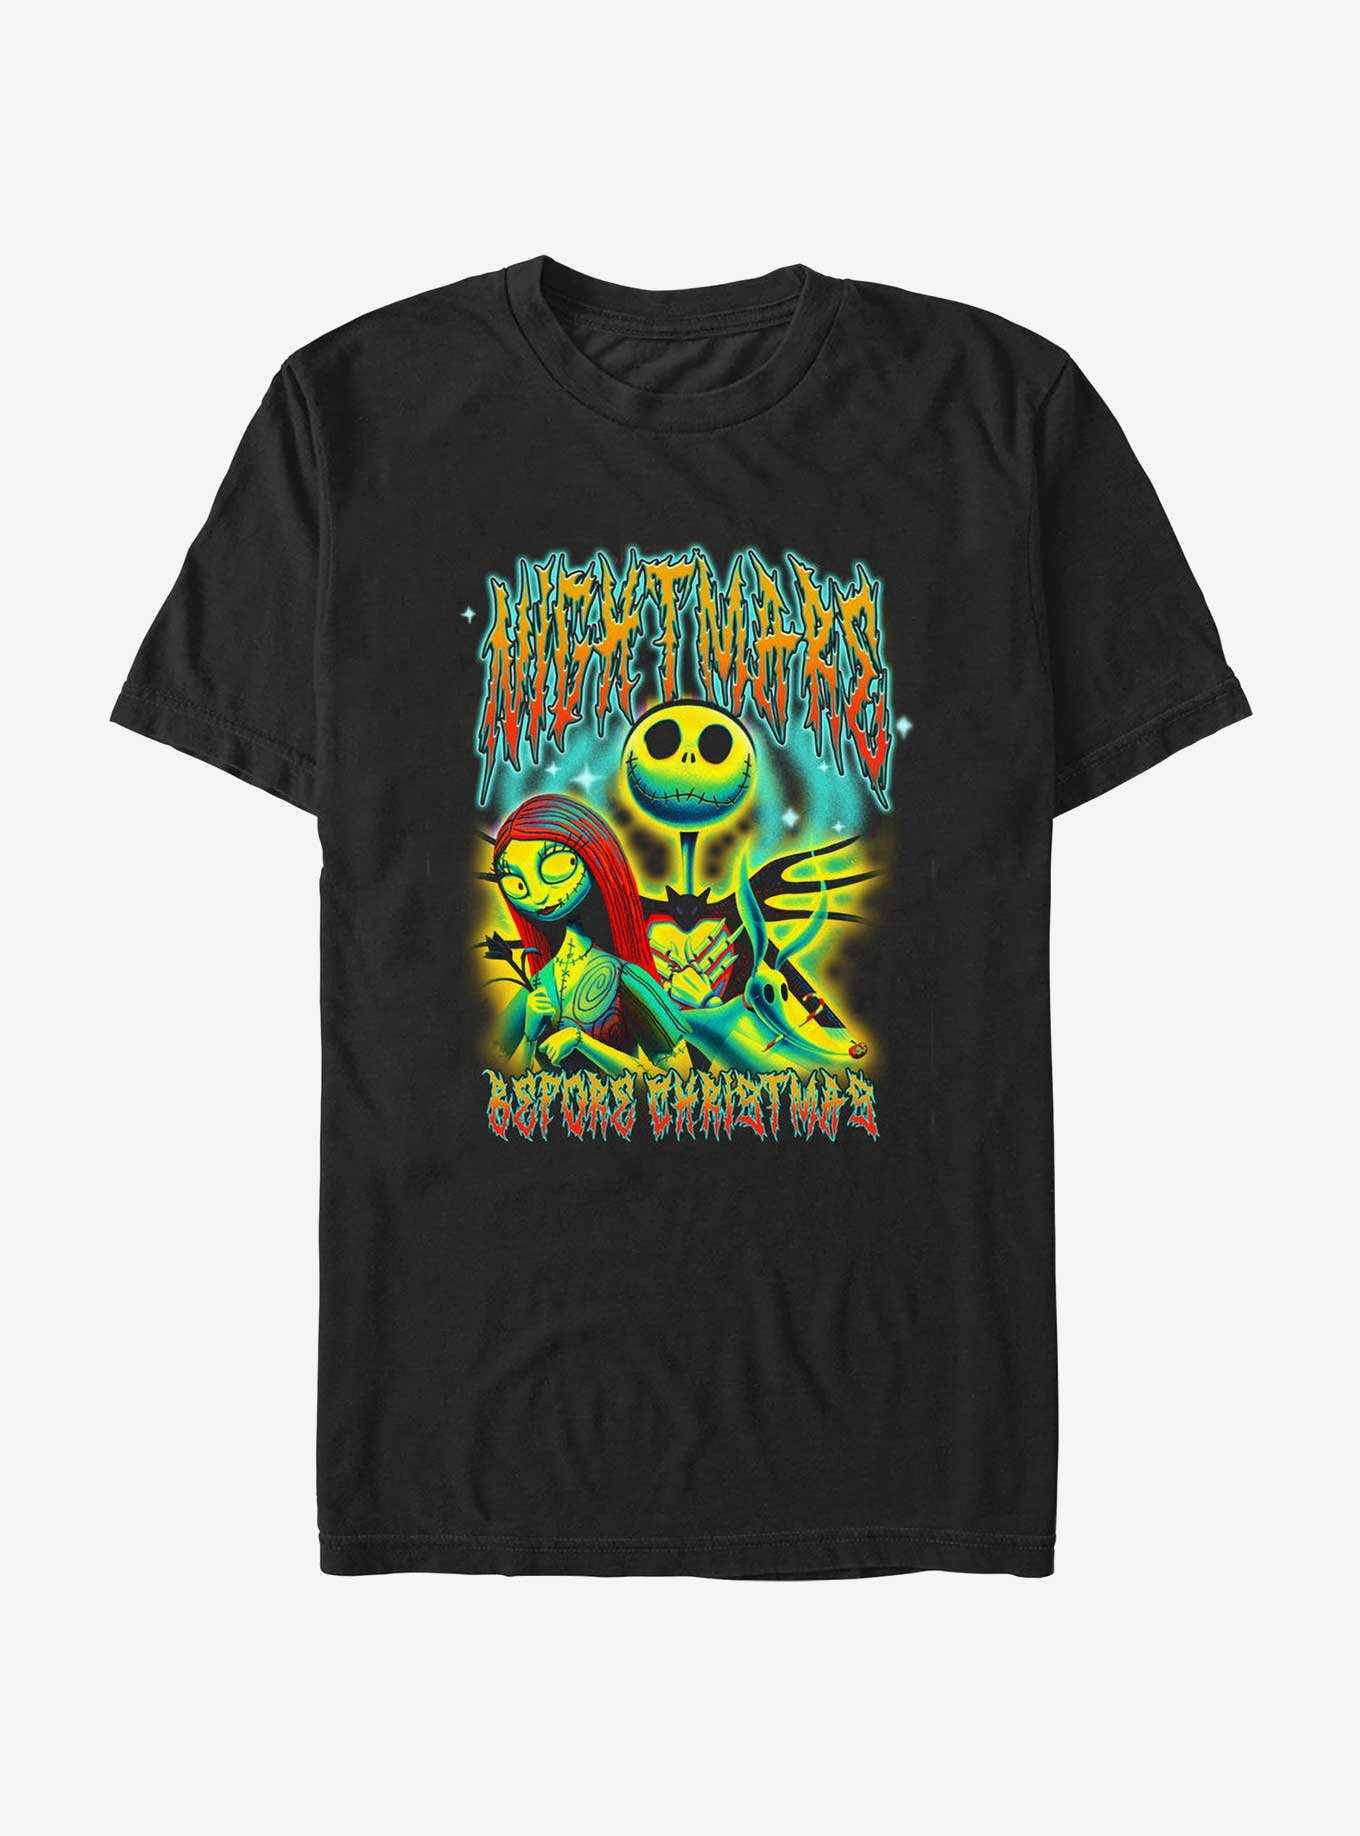 Disney The Nightmare Before Christmas Spooky Group T-Shirt, , hi-res